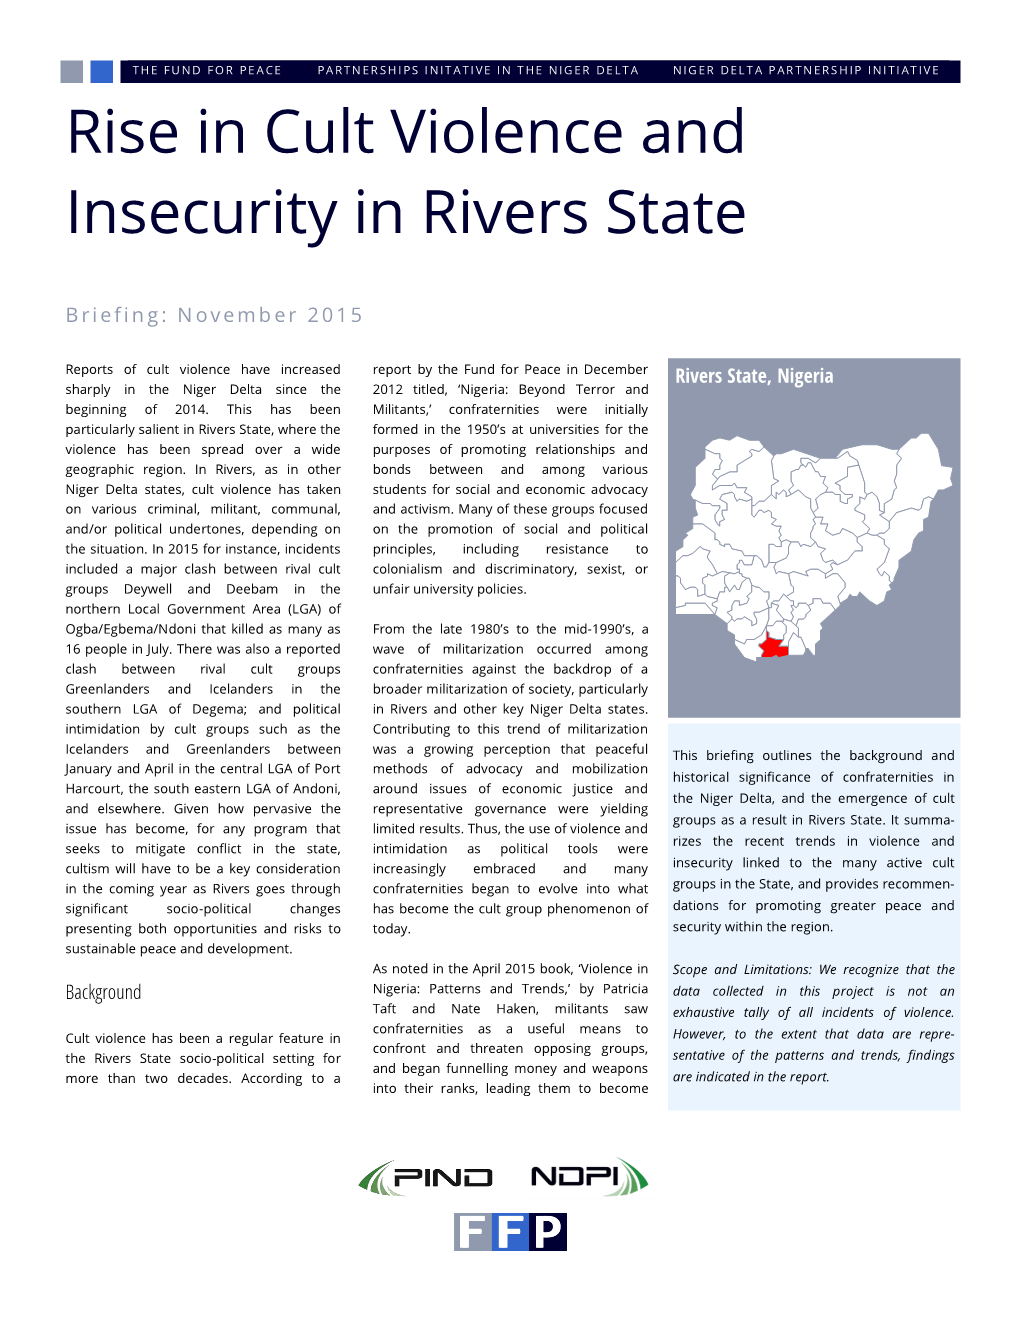 Rise in Cult Violence and Insecurity in Rivers State